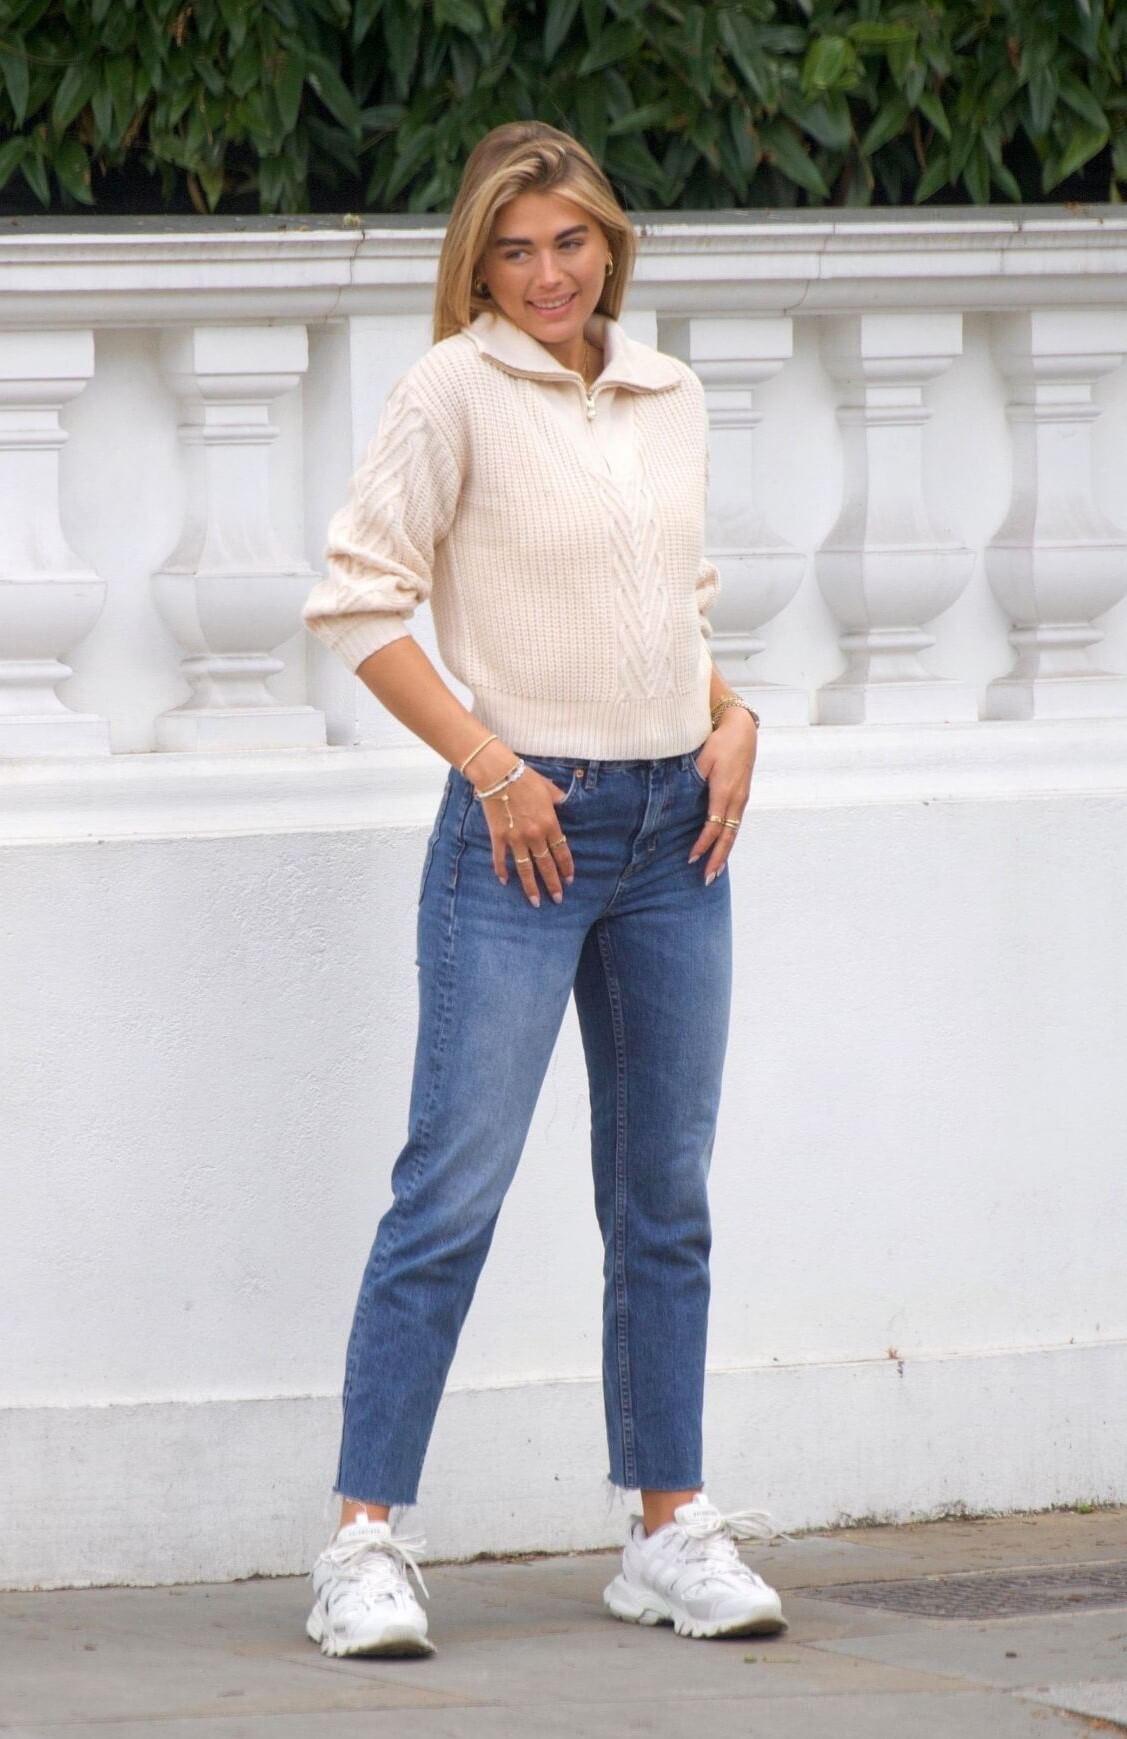 Arabella Chi In Off White Woolen With Collar Sweater& Blue Denim Jeans At Photoshoot in London